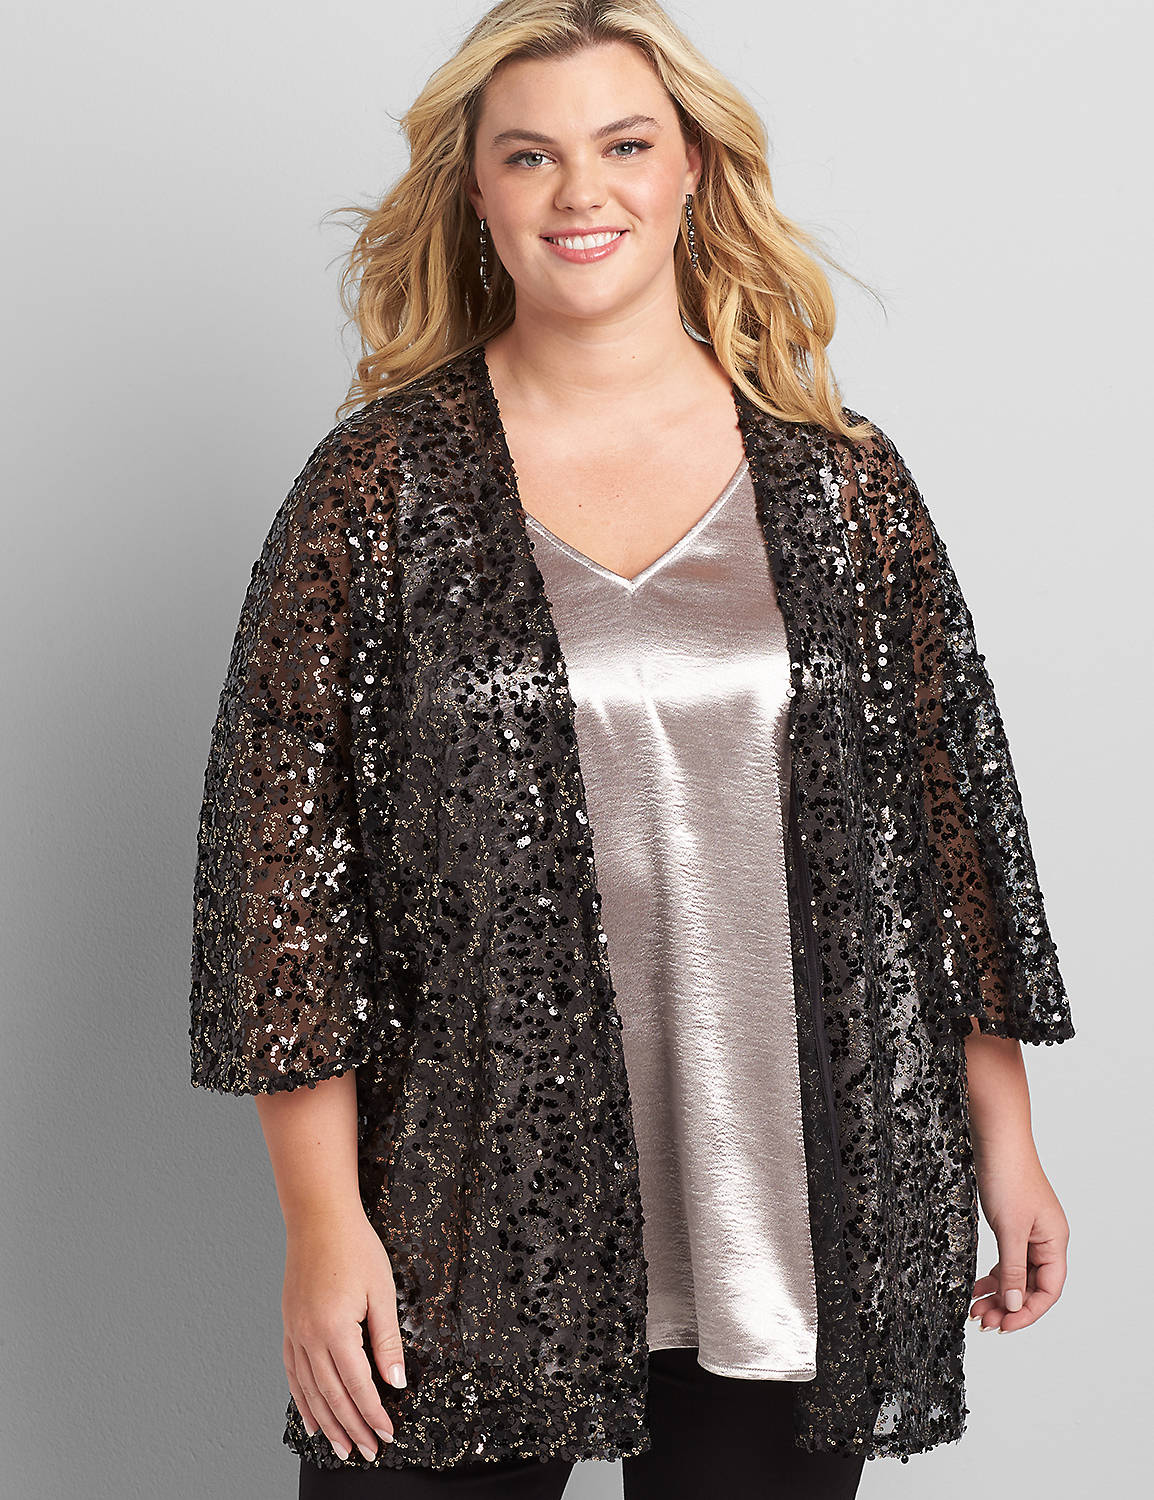 Outlet 3/4 Sleeve Sequin Kimono Scattered Sequin Over Piece 1117396:Black Ground W/Gold/Black Sequins- As Hanger:18/20 Product Image 1